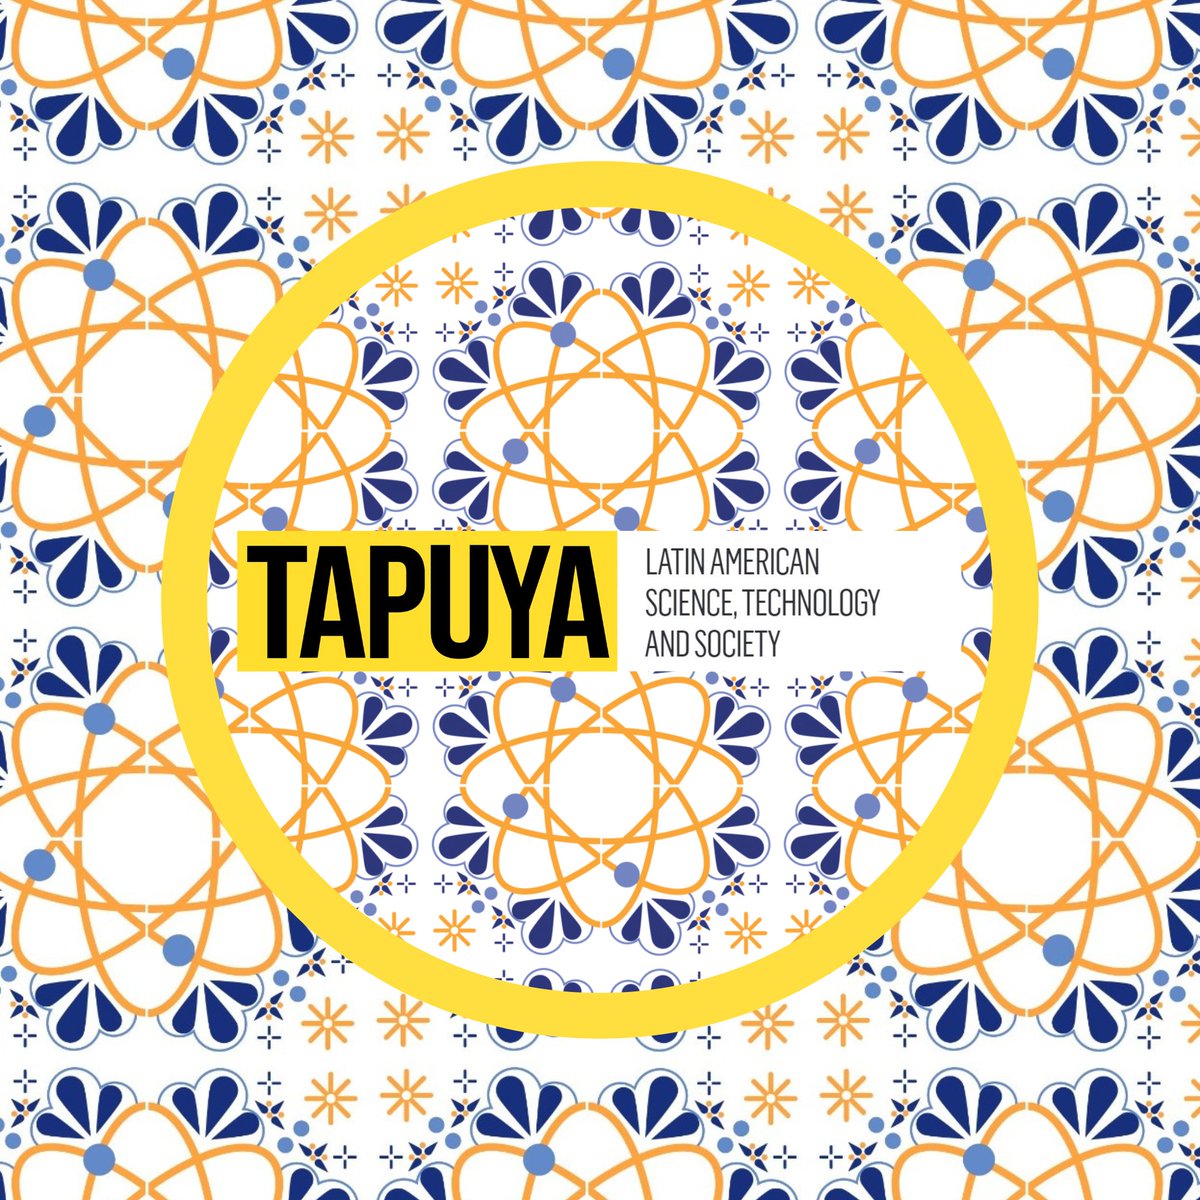 Tapuya Volume 7 is now open! ✨ Tapuya is a forum for STS research that elicits conversations within Latin America, between Latin America and Euro-American cultures, and across global peripheries. Find us at tapuya.org/our-journal-2/… 👓 or tandfonline.com/toc/ttap20/7/1 🖥️ #OpenAccess